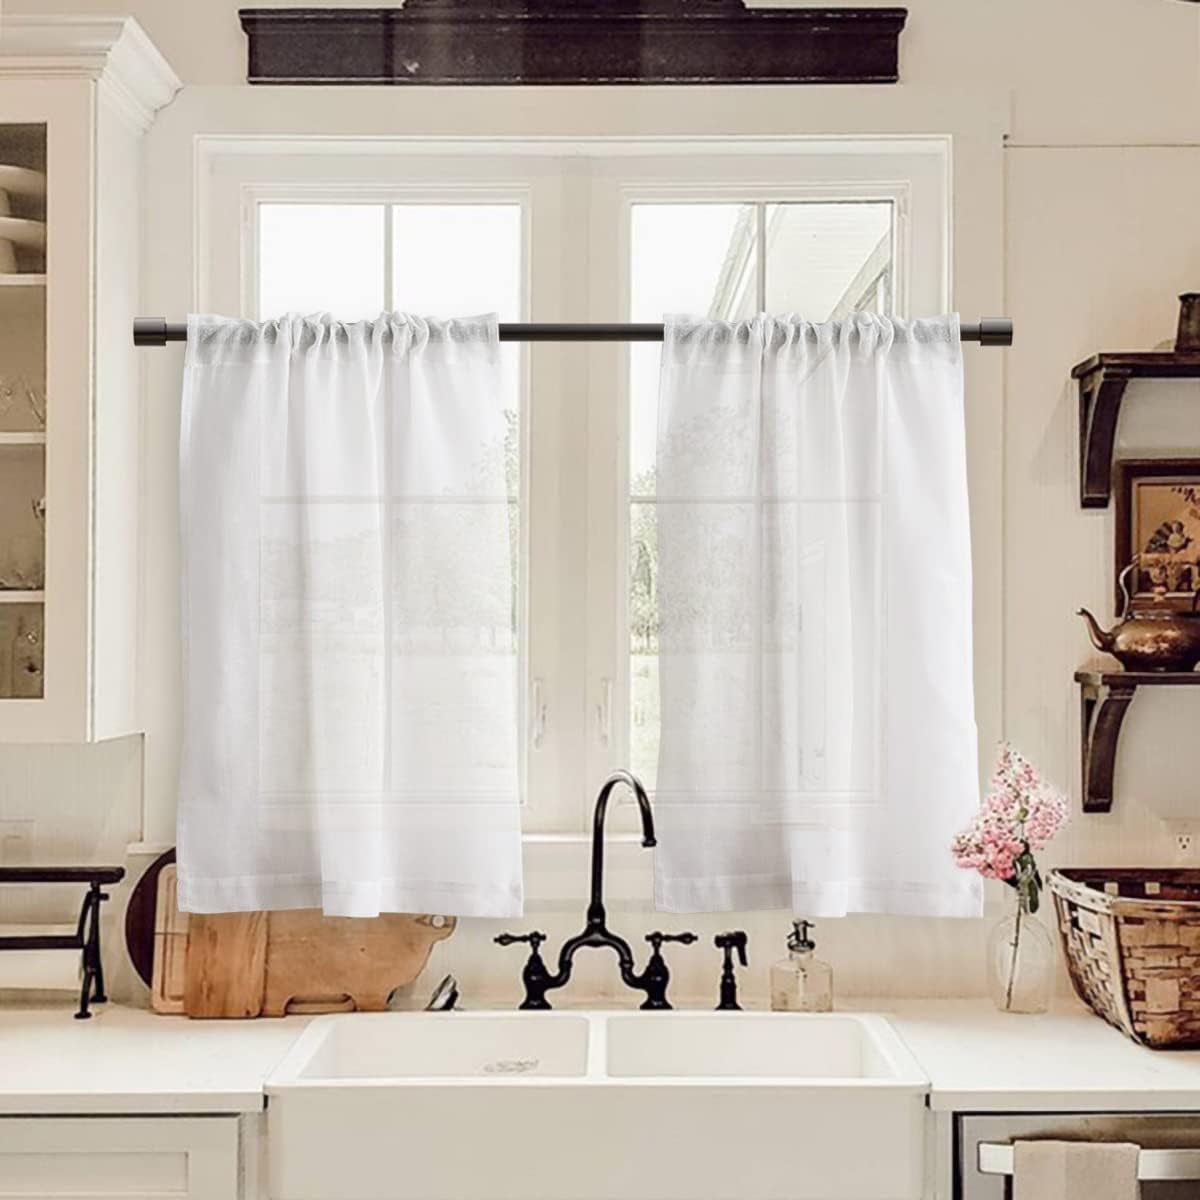 XTMYI off White Semi Sheer Short Curtains Rod Pocket Kitchen Neutral Linen Textured Casual Weave Cafe Half Cream Ivory Small Window Treatments 36 Inches Long for Travel Bathroom Laundry Room 2 Panels  XTMYI TEXTILE White 26X24 